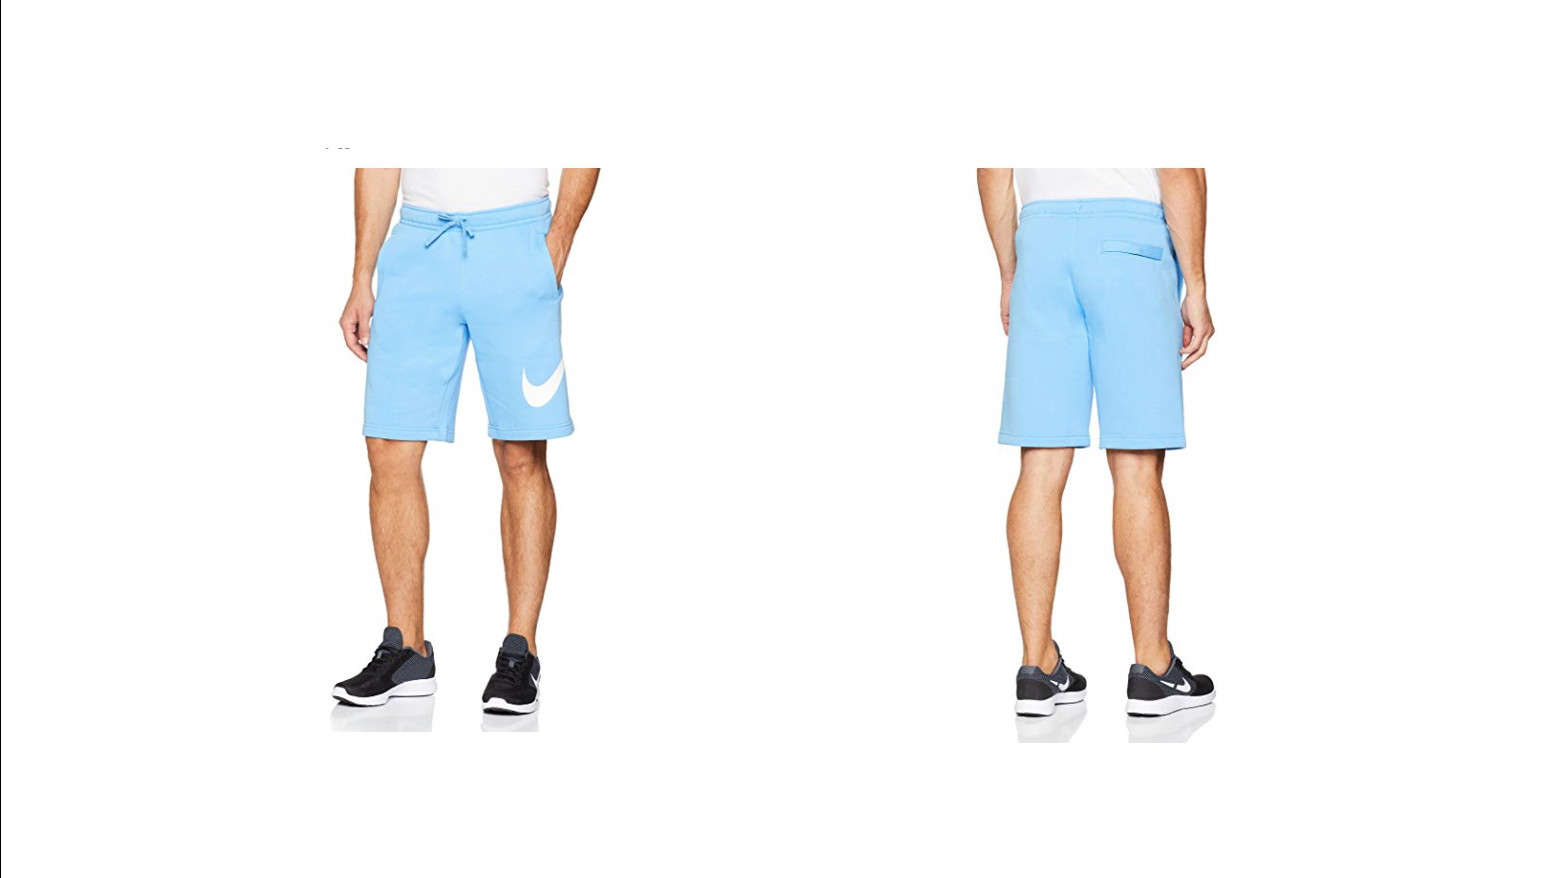 10 Nike Sweatpant Shorts You Need in Your Festival Bag | Heavy.com